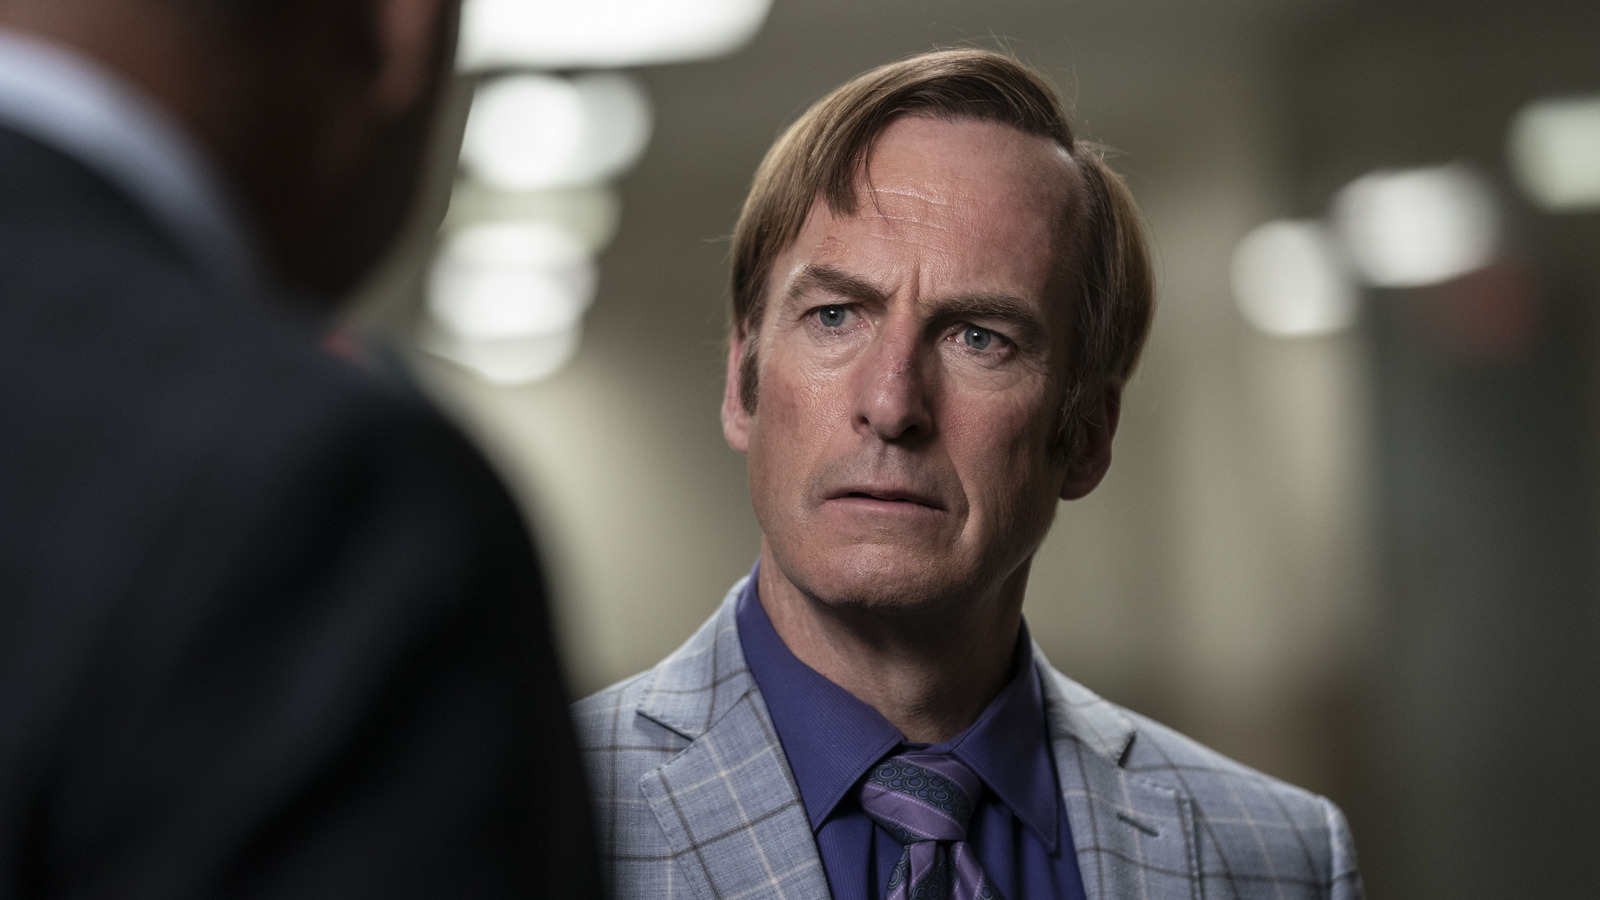 #Better Call Saul Season 6 Begins With The Shocking One-Two-Punch Of ‘Wine And Roses’ And ‘Carrot And Stick’